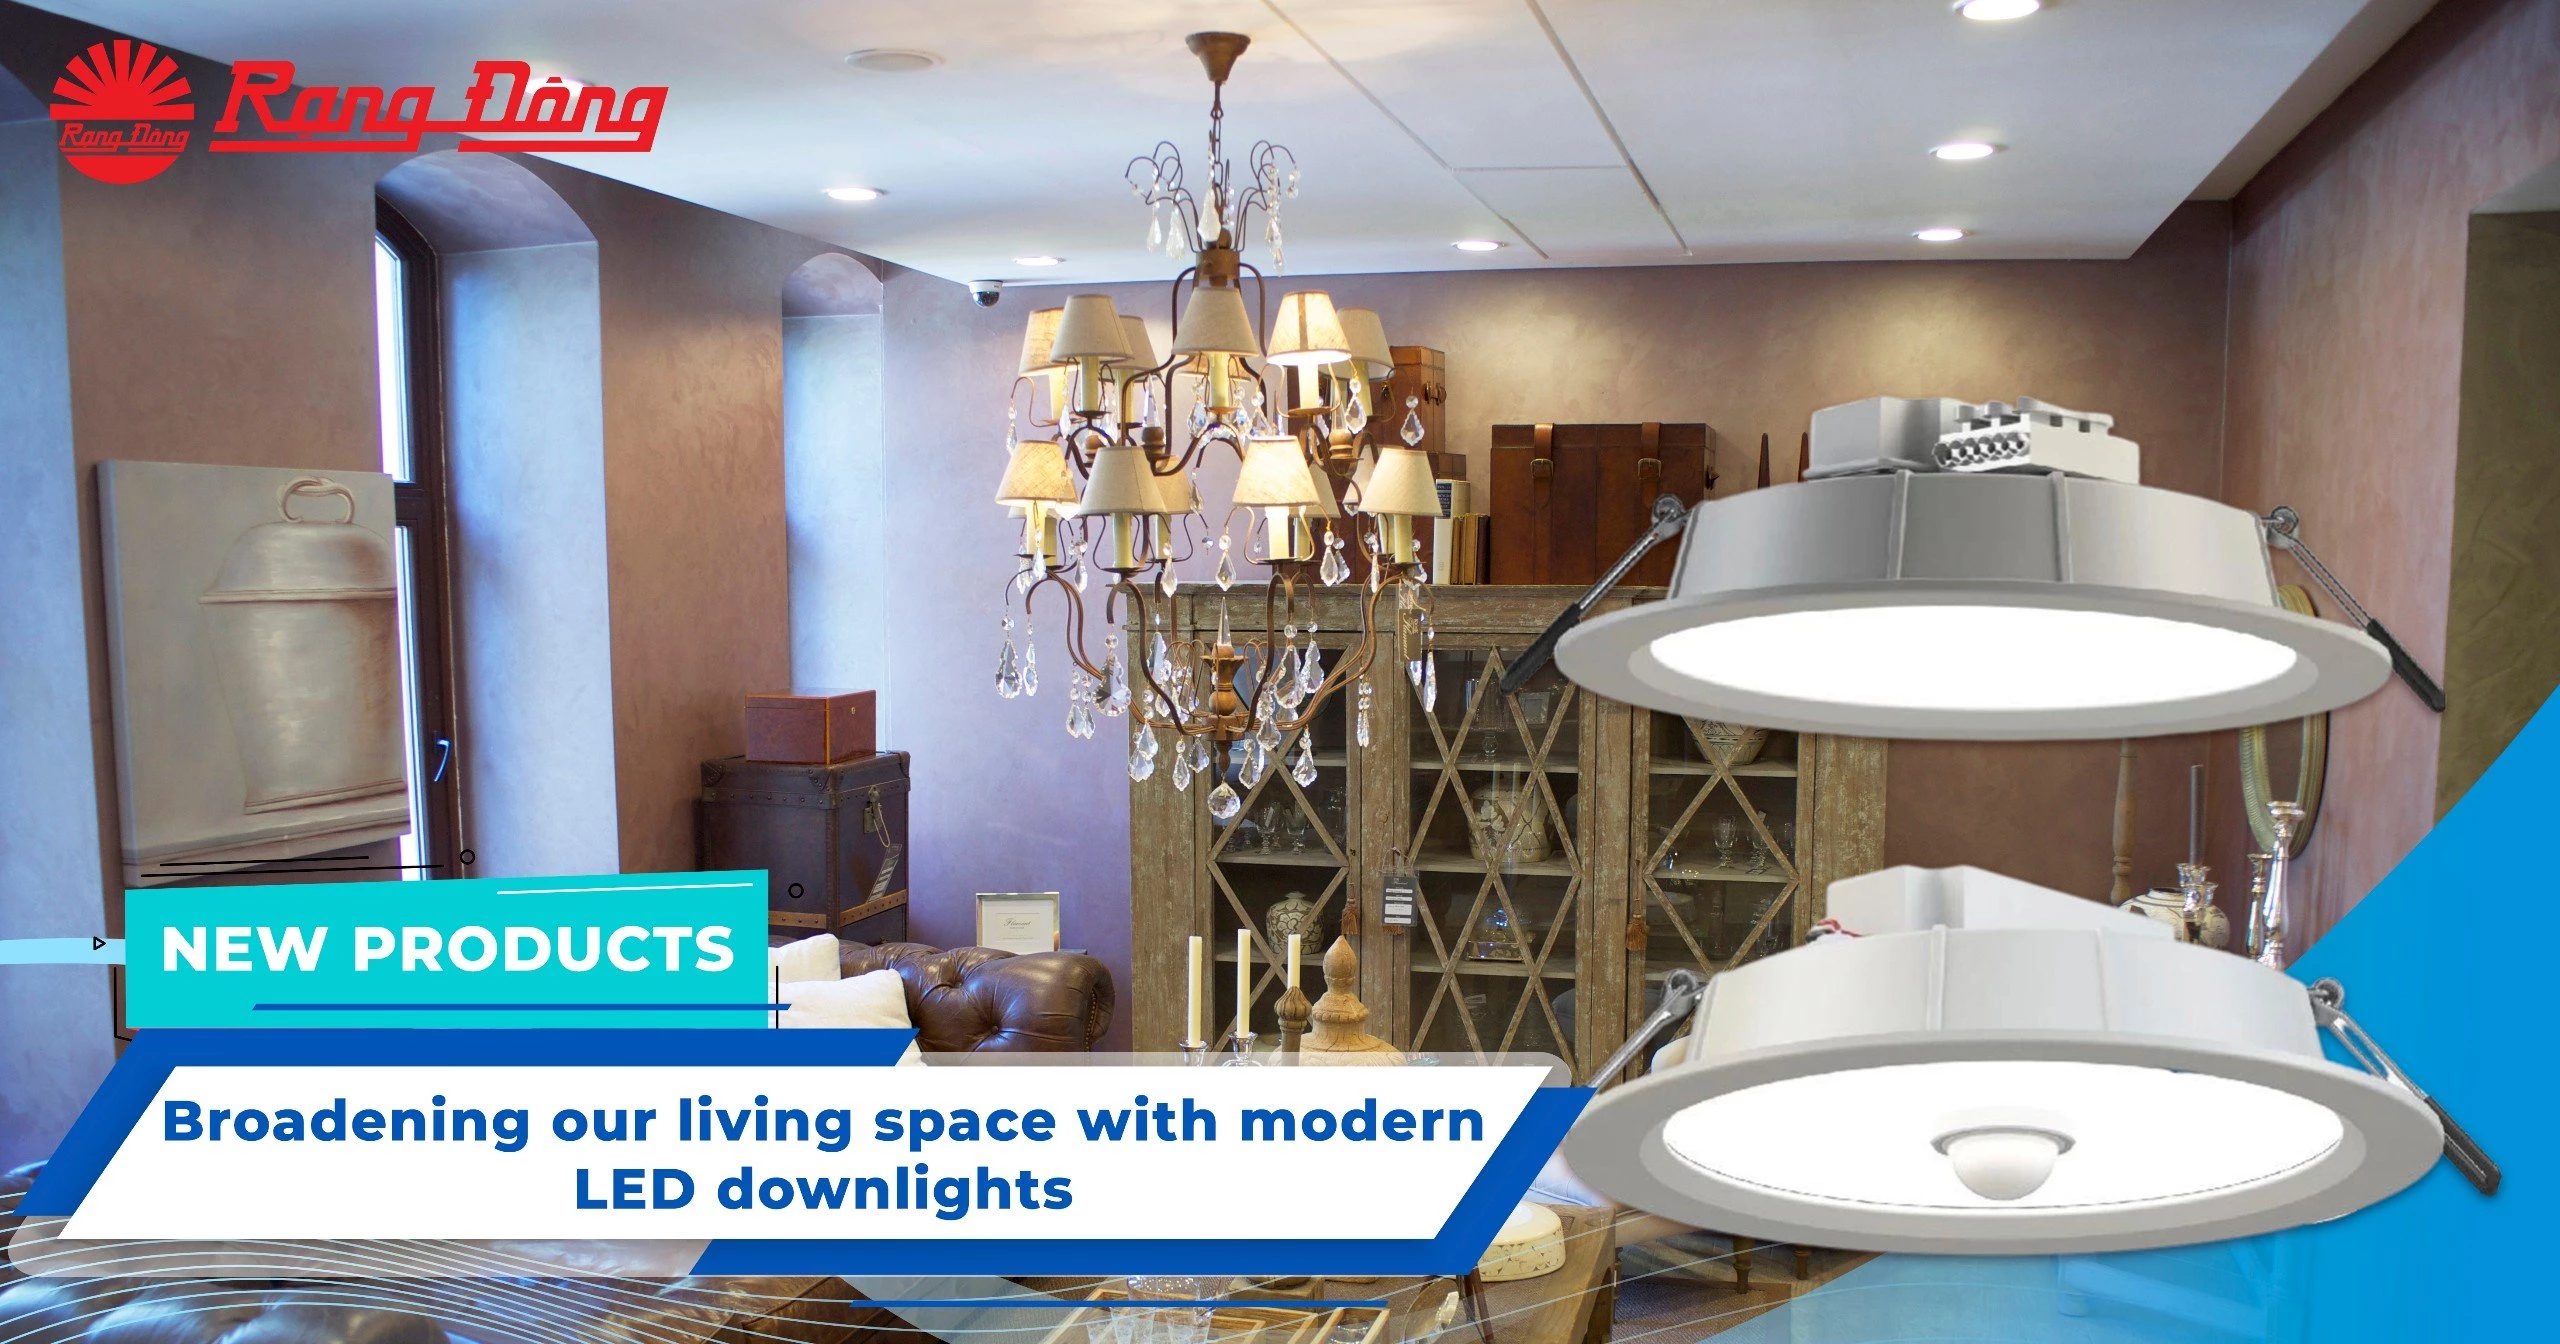 Broadening our living space with modern LED downlights